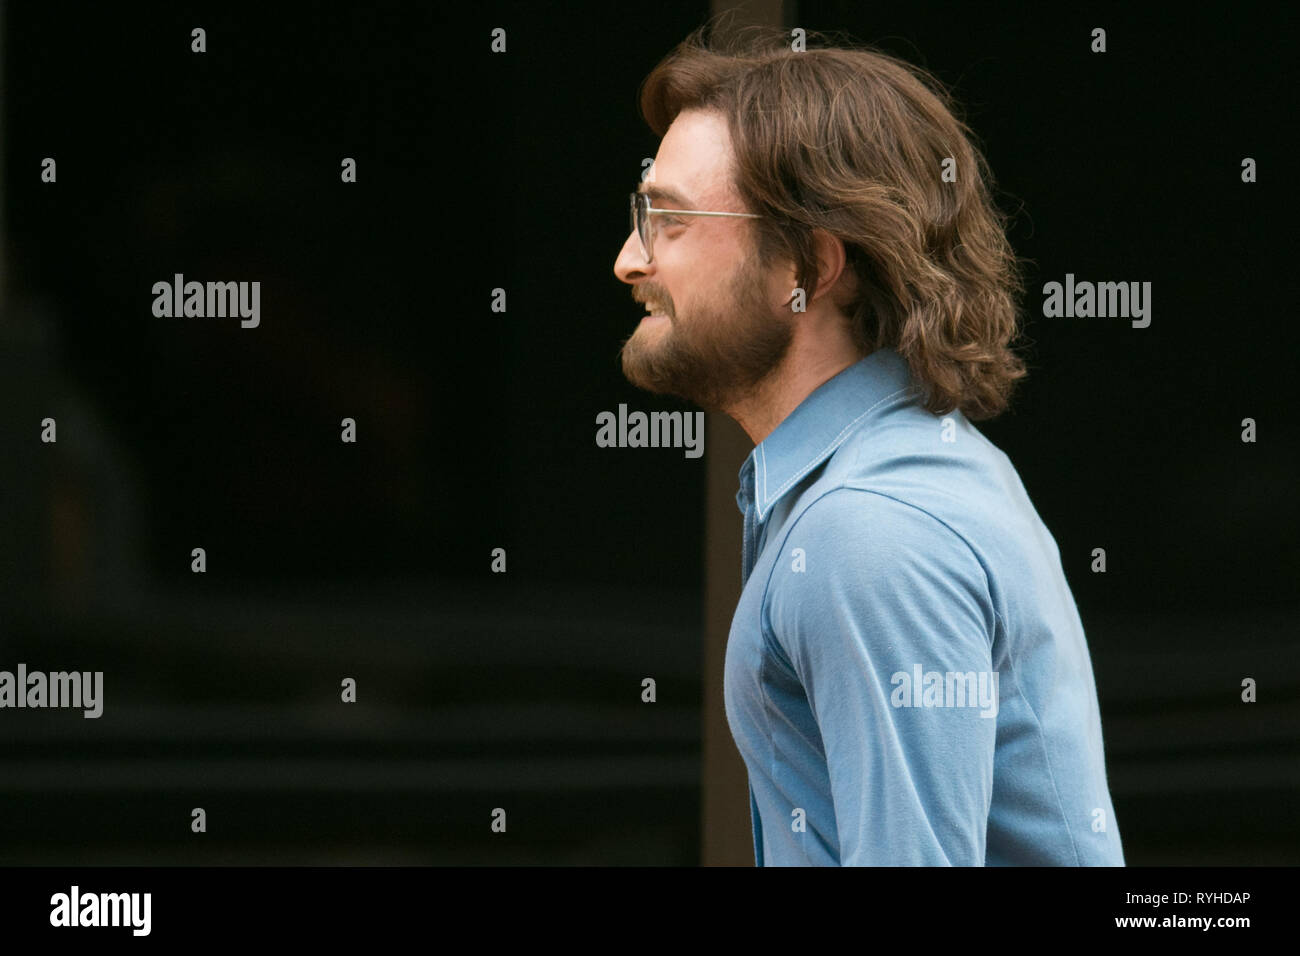 Adelaide Australia. 13th March 2019. British actor Daniel Radcliffe on the film set in Adelaide in his new acting role as an Anti-Aprtheid activist in 'Escape from Pretoria Africa in 1978 based on  based on a book by Tim Jenkin and is set during the Apartheid era in Capetown, South Africa about two white South Africans, Tim Jenkin and Stephen Lee, who were jailed in 1978 for producing and distributing anti-apartheid messages Credit: amer ghazzal/Alamy Live News Stock Photo